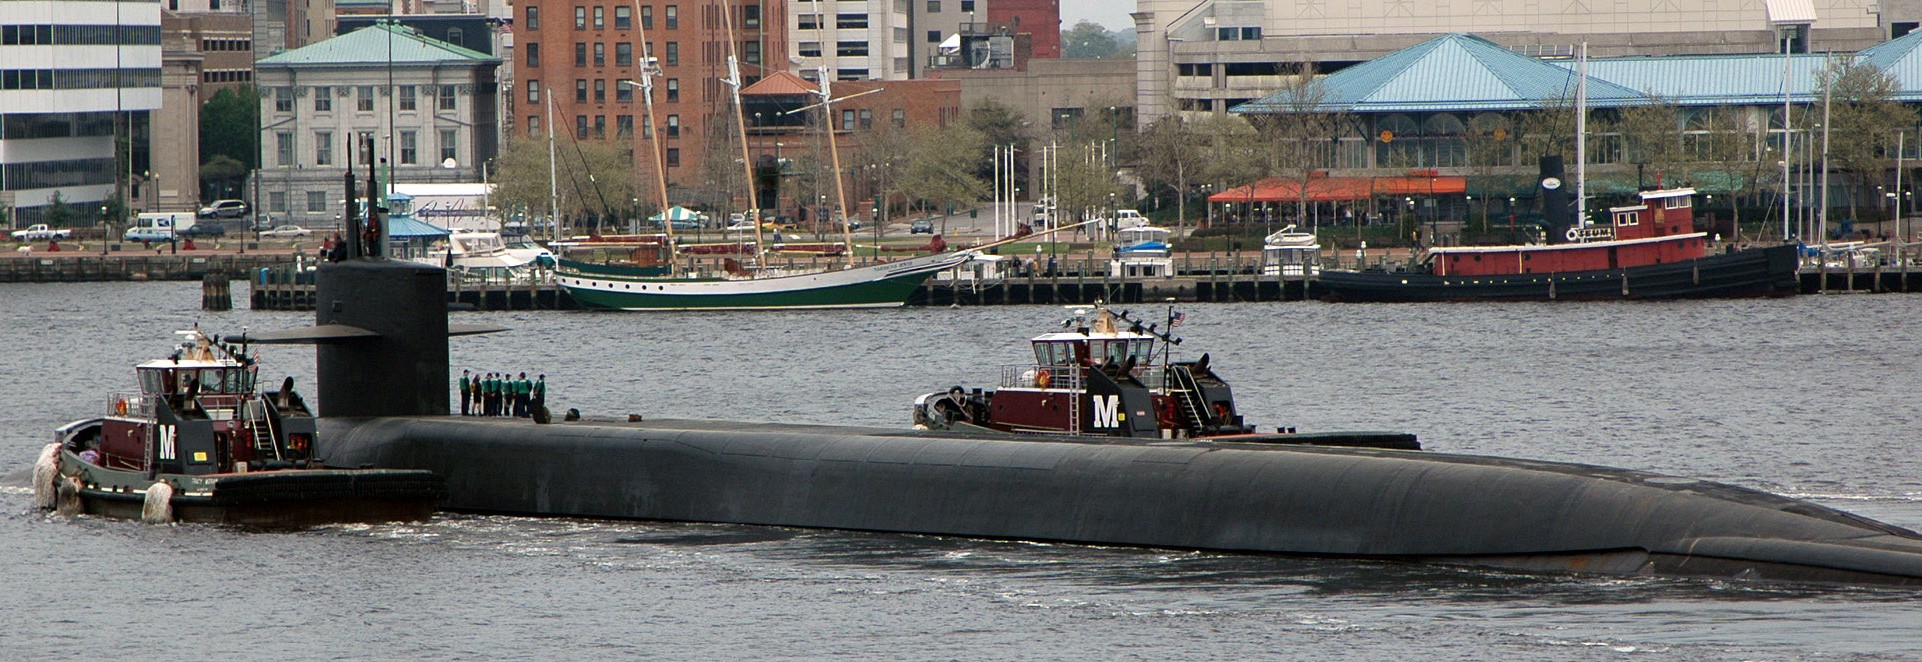 ssgn-728 uss florida guided missile submarine us navy 2006 74